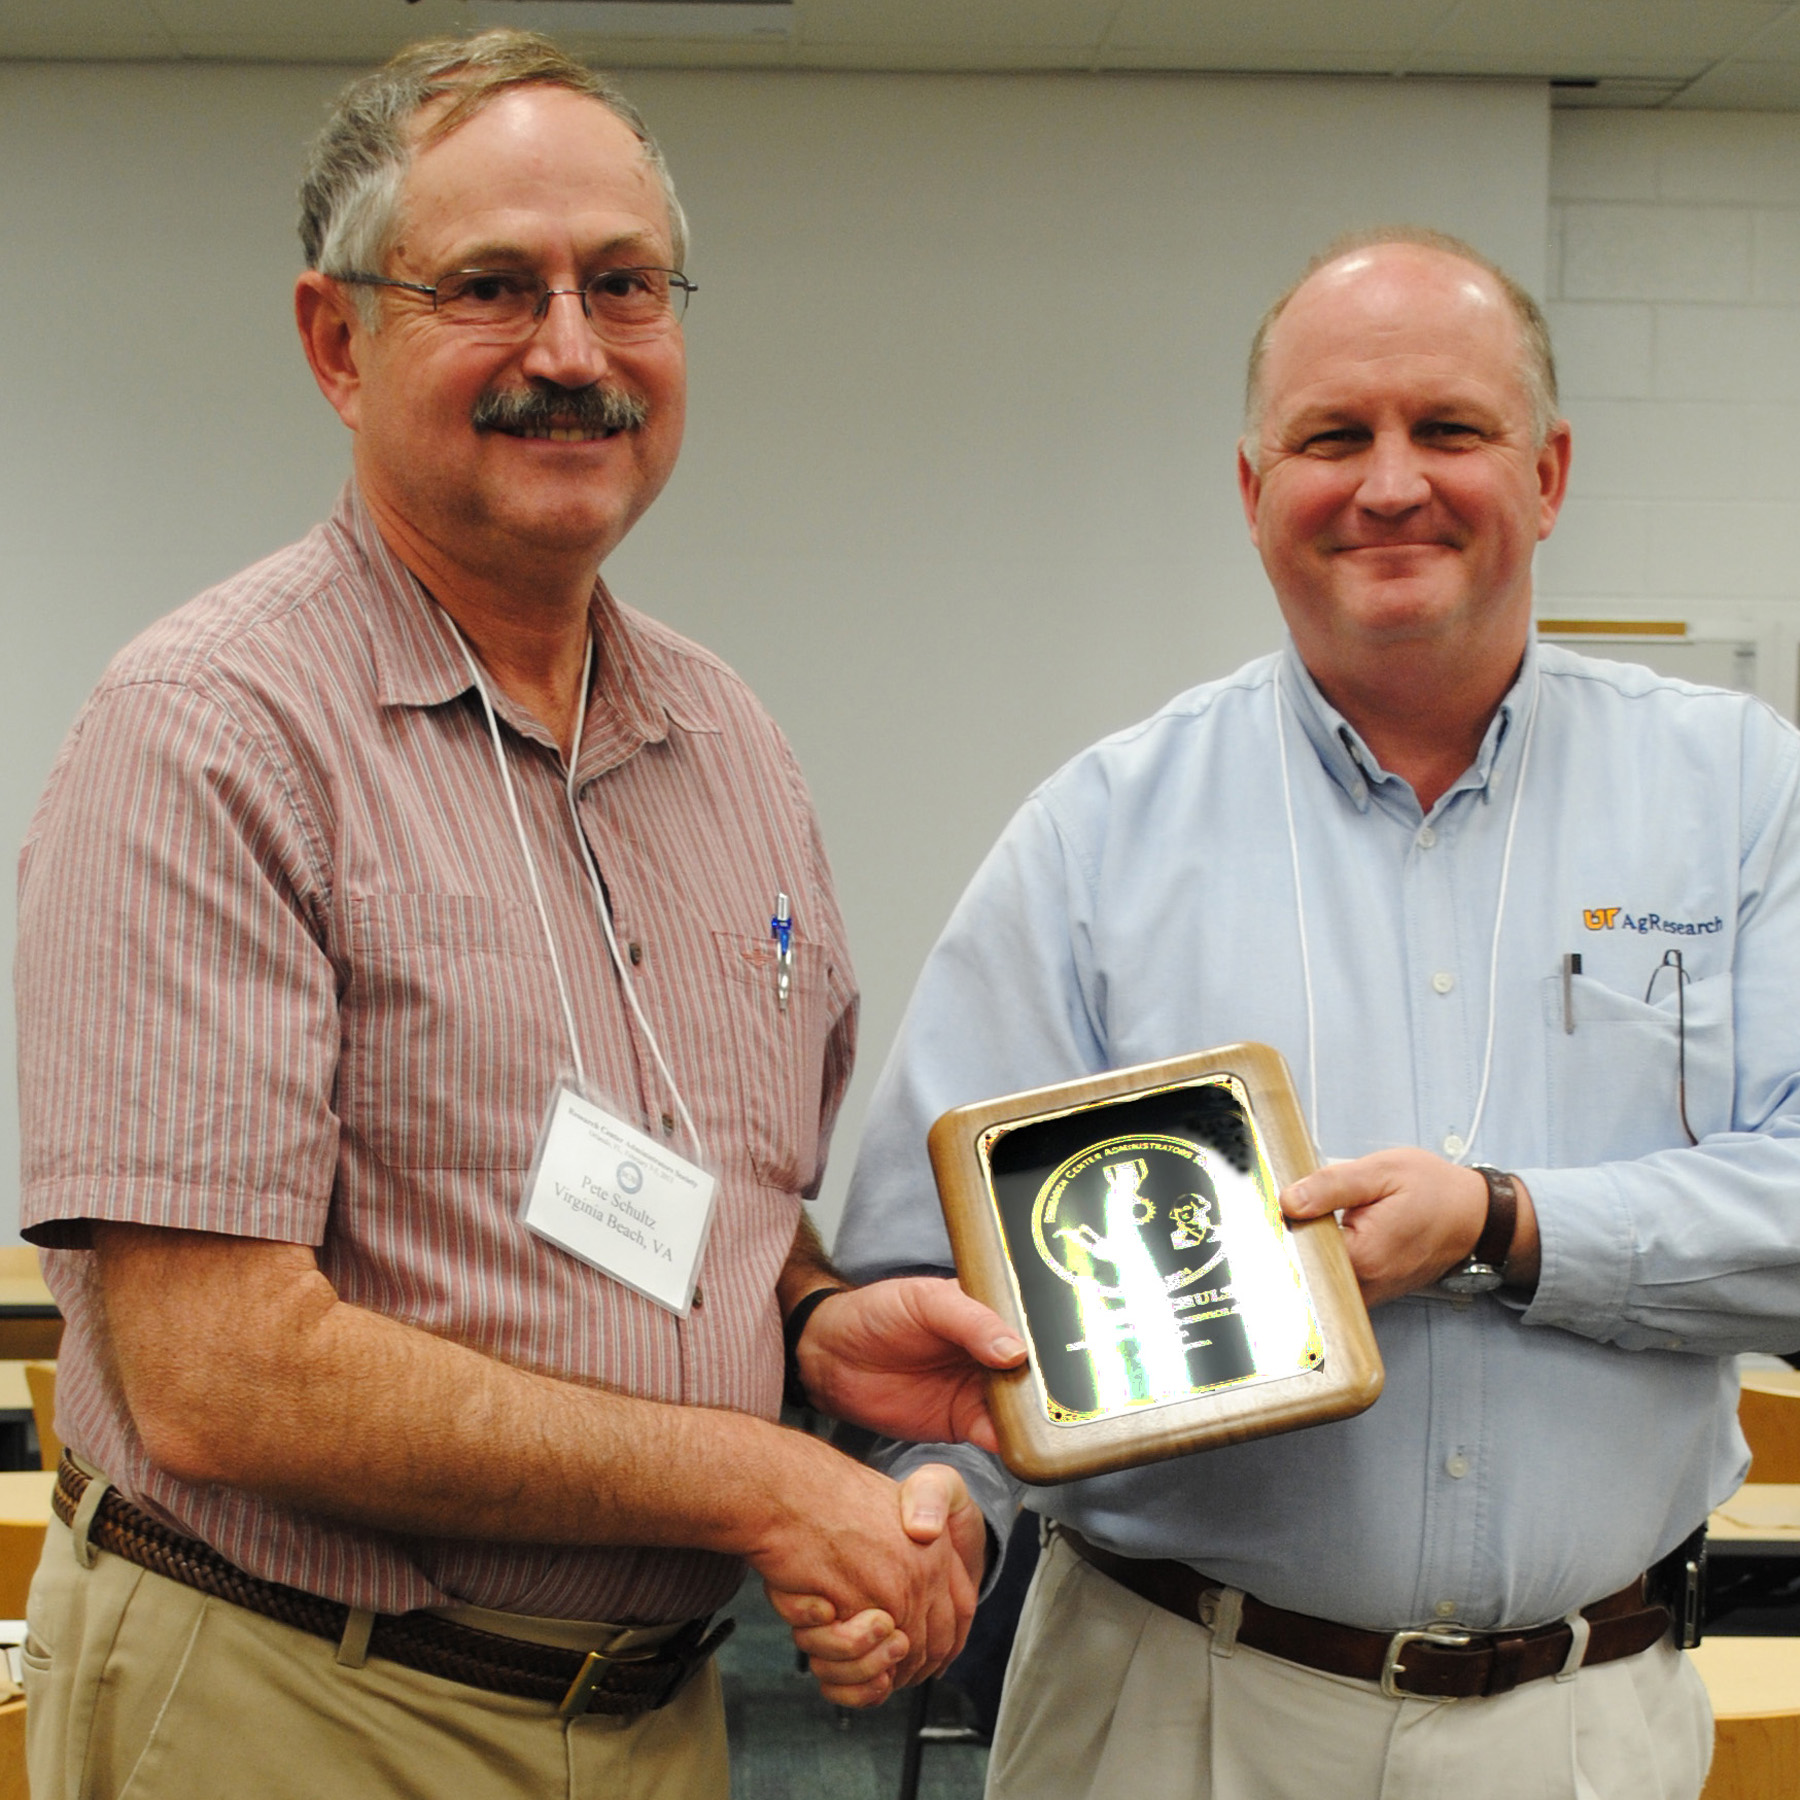 Walt Hitch presents Peter Schultz with the Distinguished Service Award from the Research Center Administrators Society of the United States.